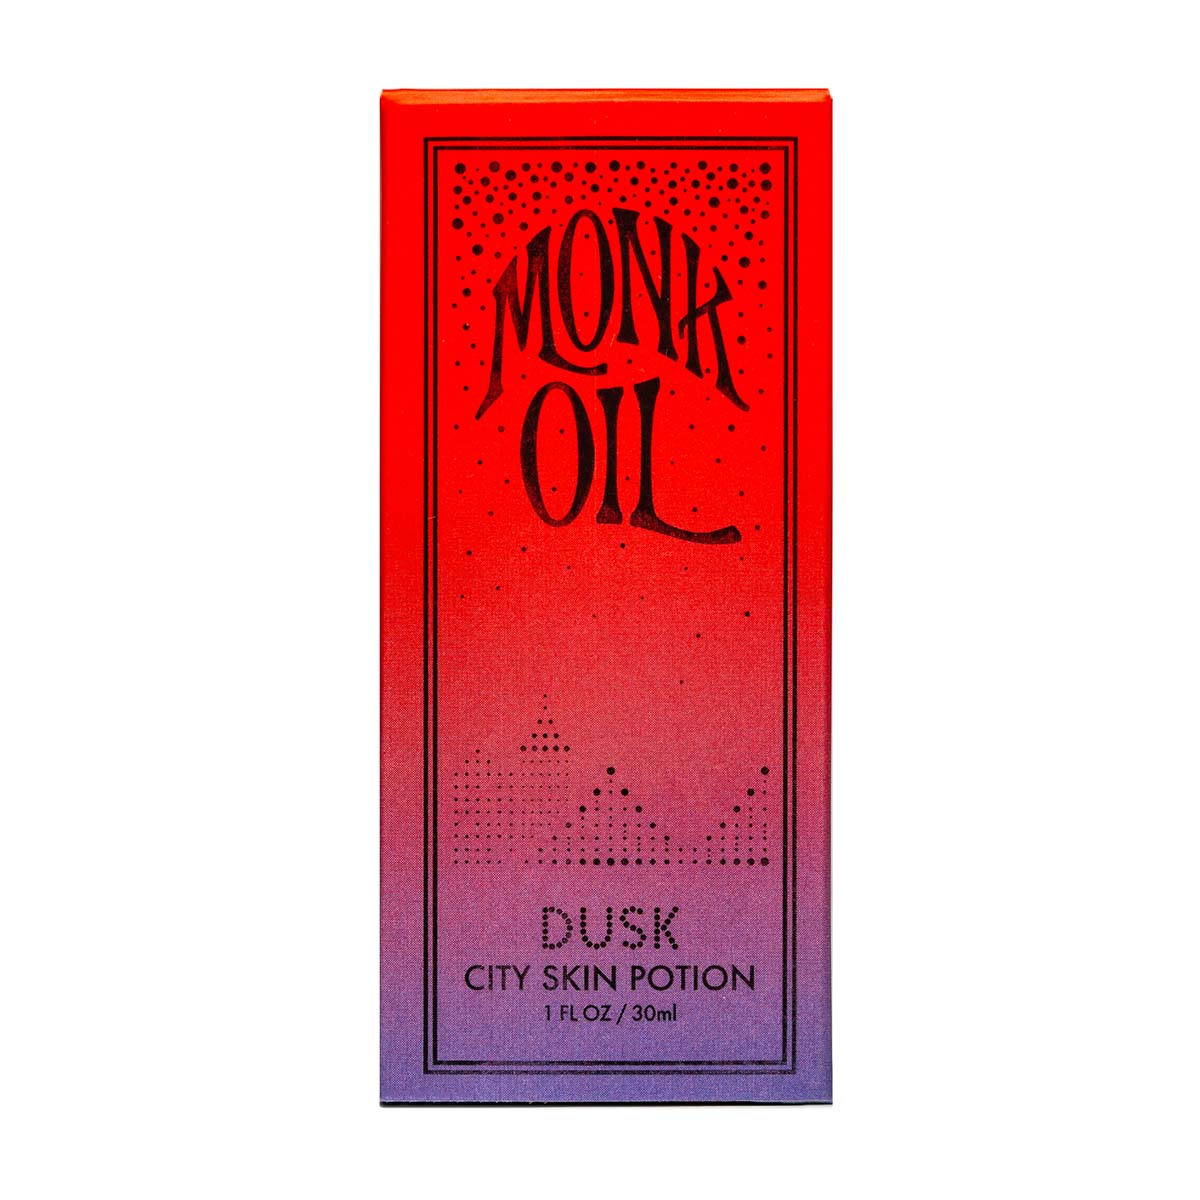 Dusk City Skin Potion | Monk Oil | Raw Living UK | Perfume | Natural Fragrance | Monk Oil Dusk City Skin Potion is a natural blend of essential oils designed to encourage passion, determination & an inner-knowing. Can be used as a perfume.